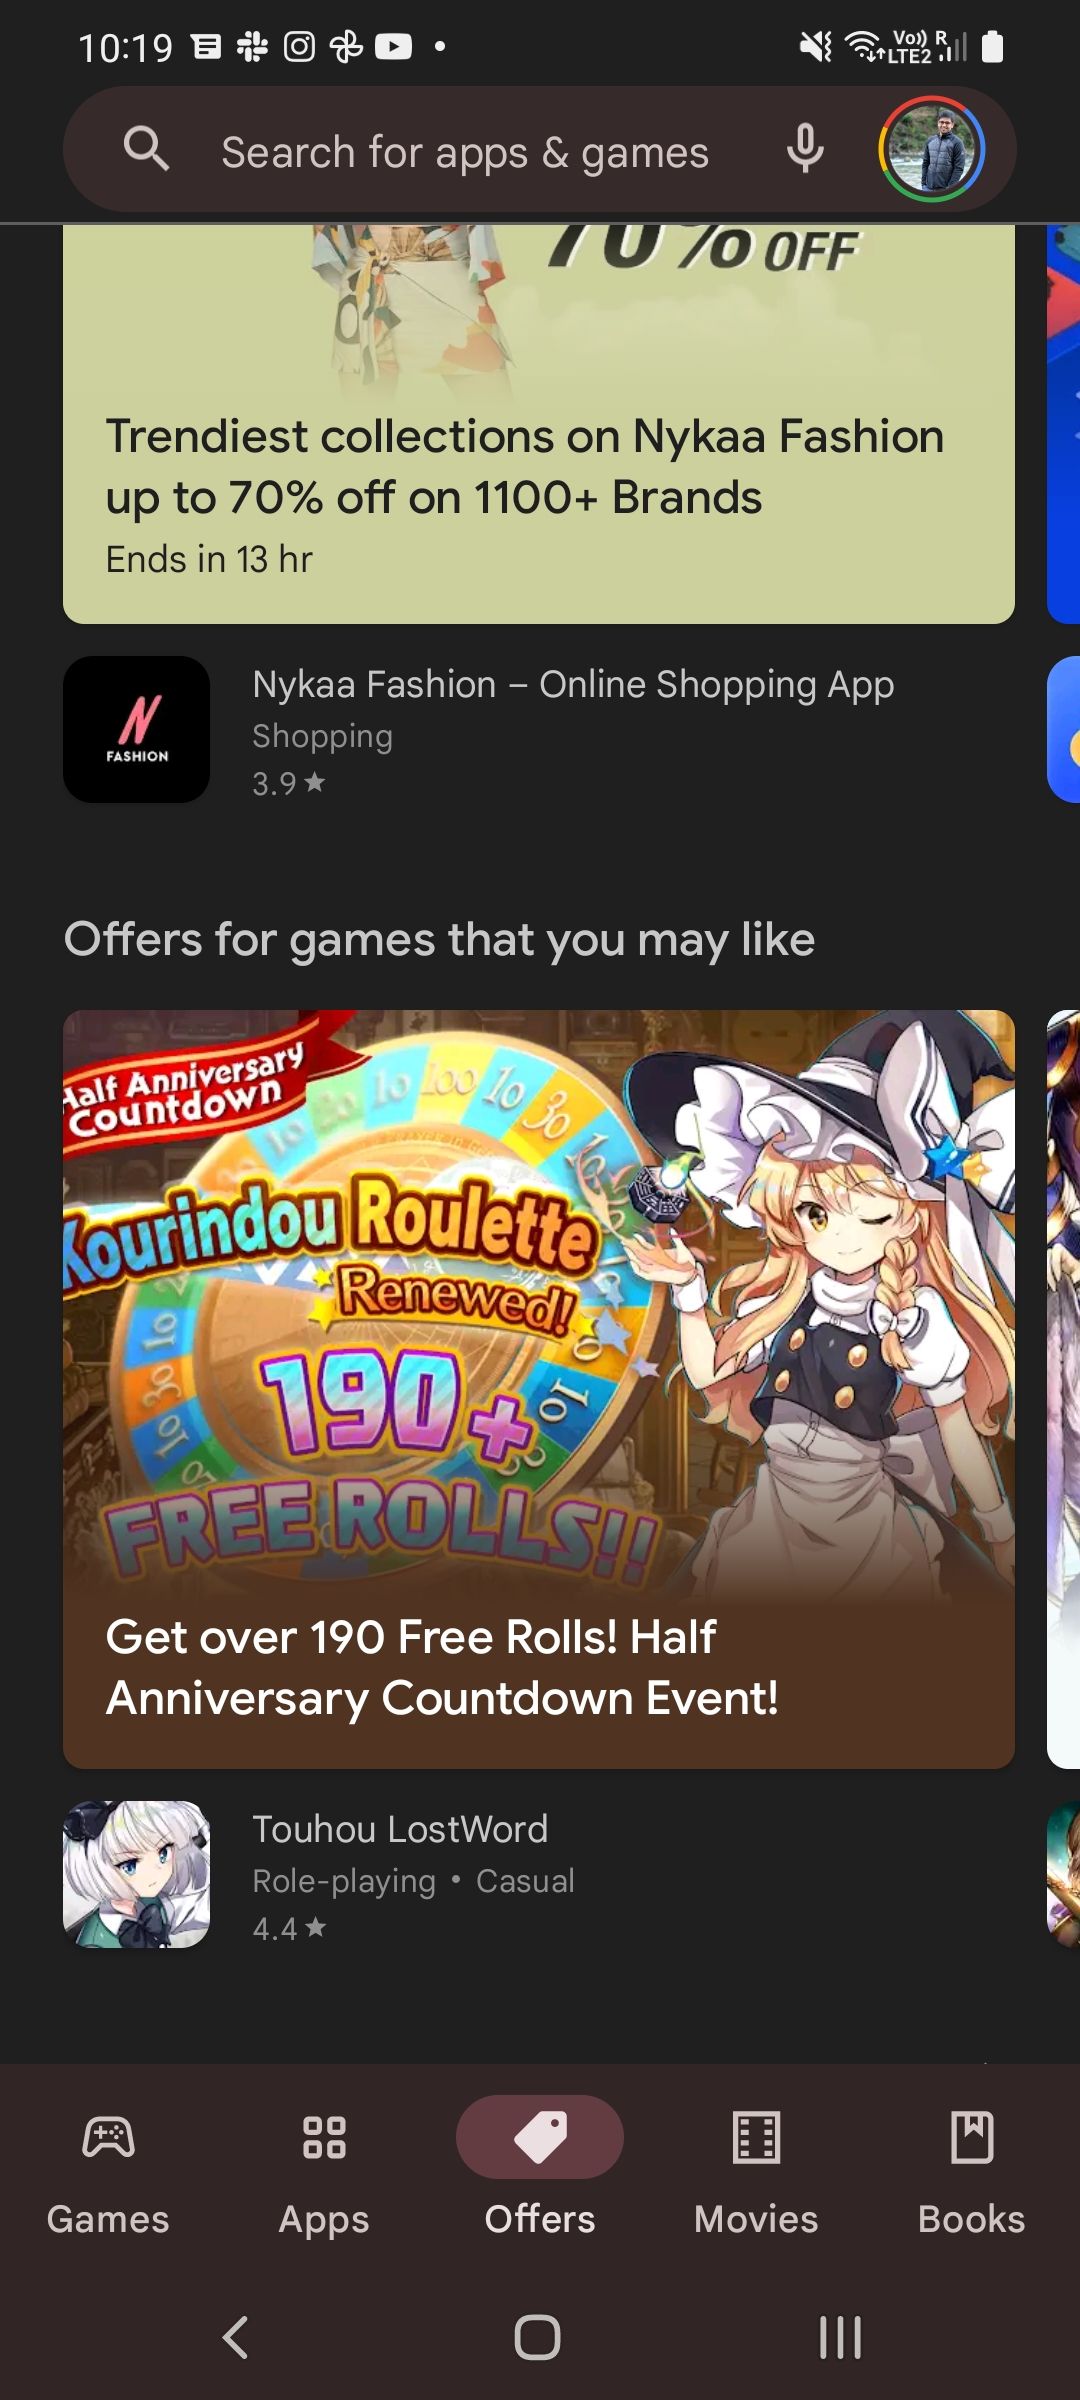 Offers tab in Google Play Store